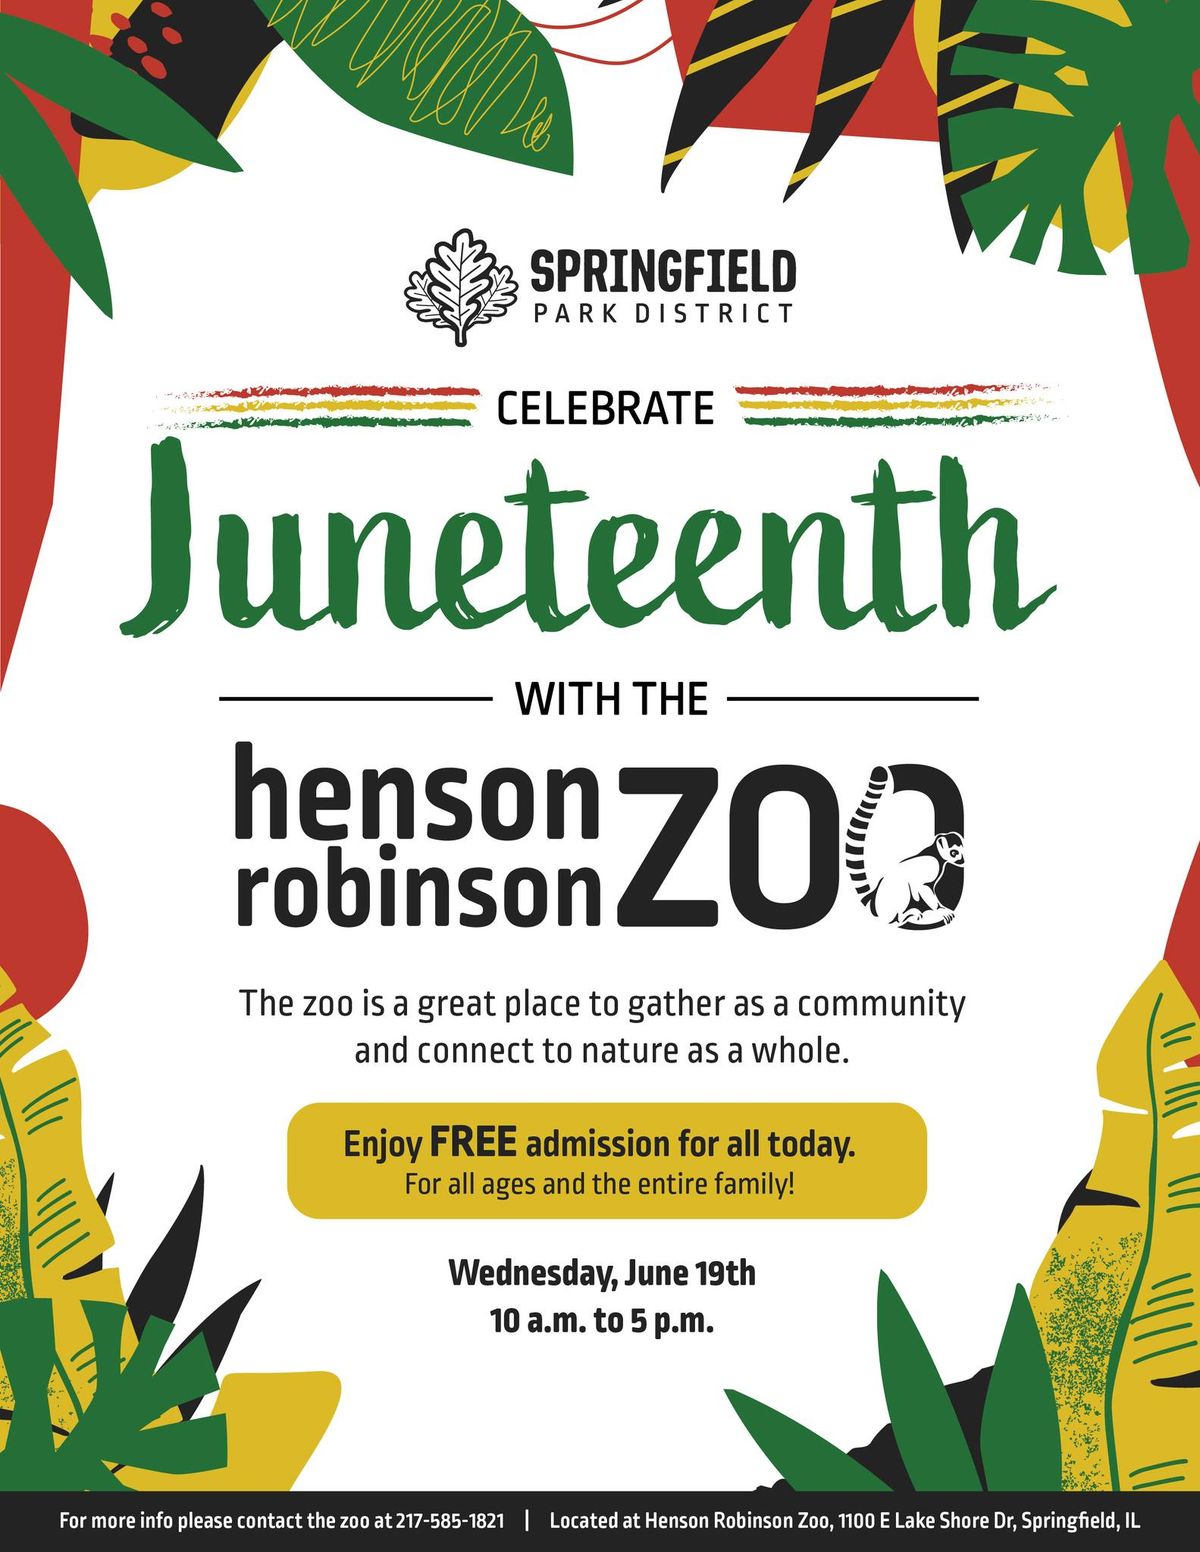 Juneteenth with the Henson Robinson Zoo!